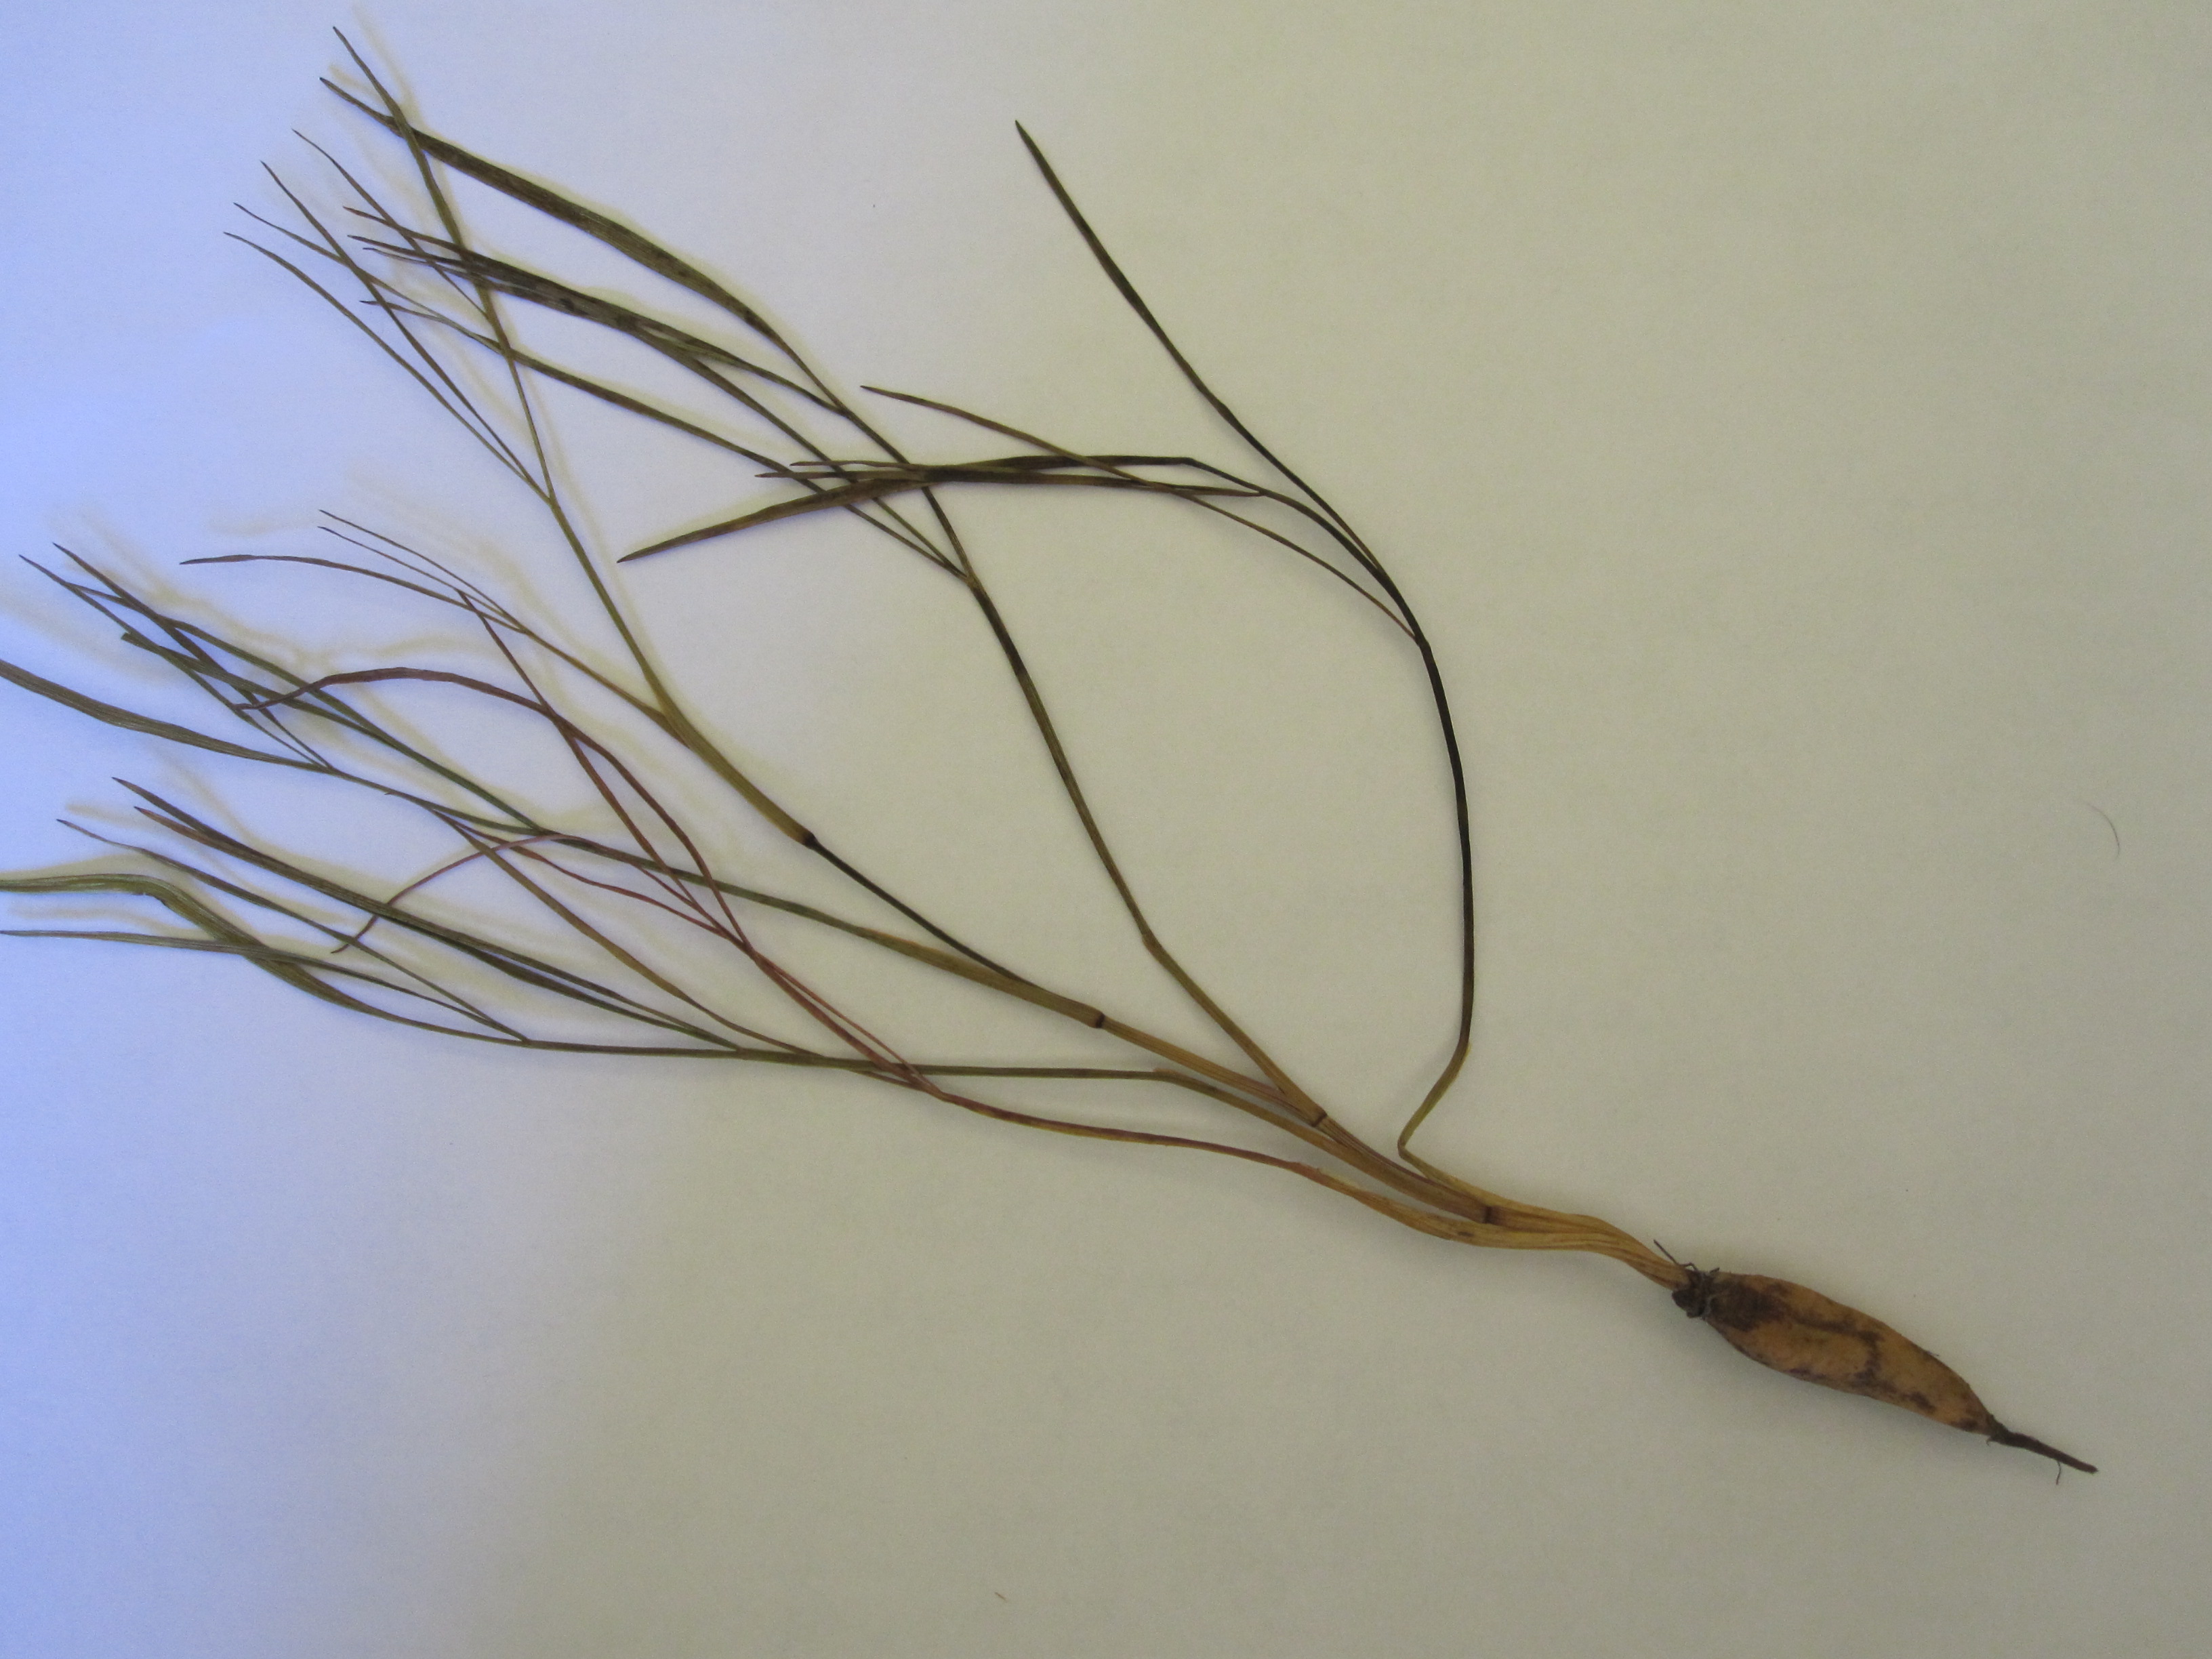 specimen of Gairdner's Yampah, showing leaves and roots, lying on a white background